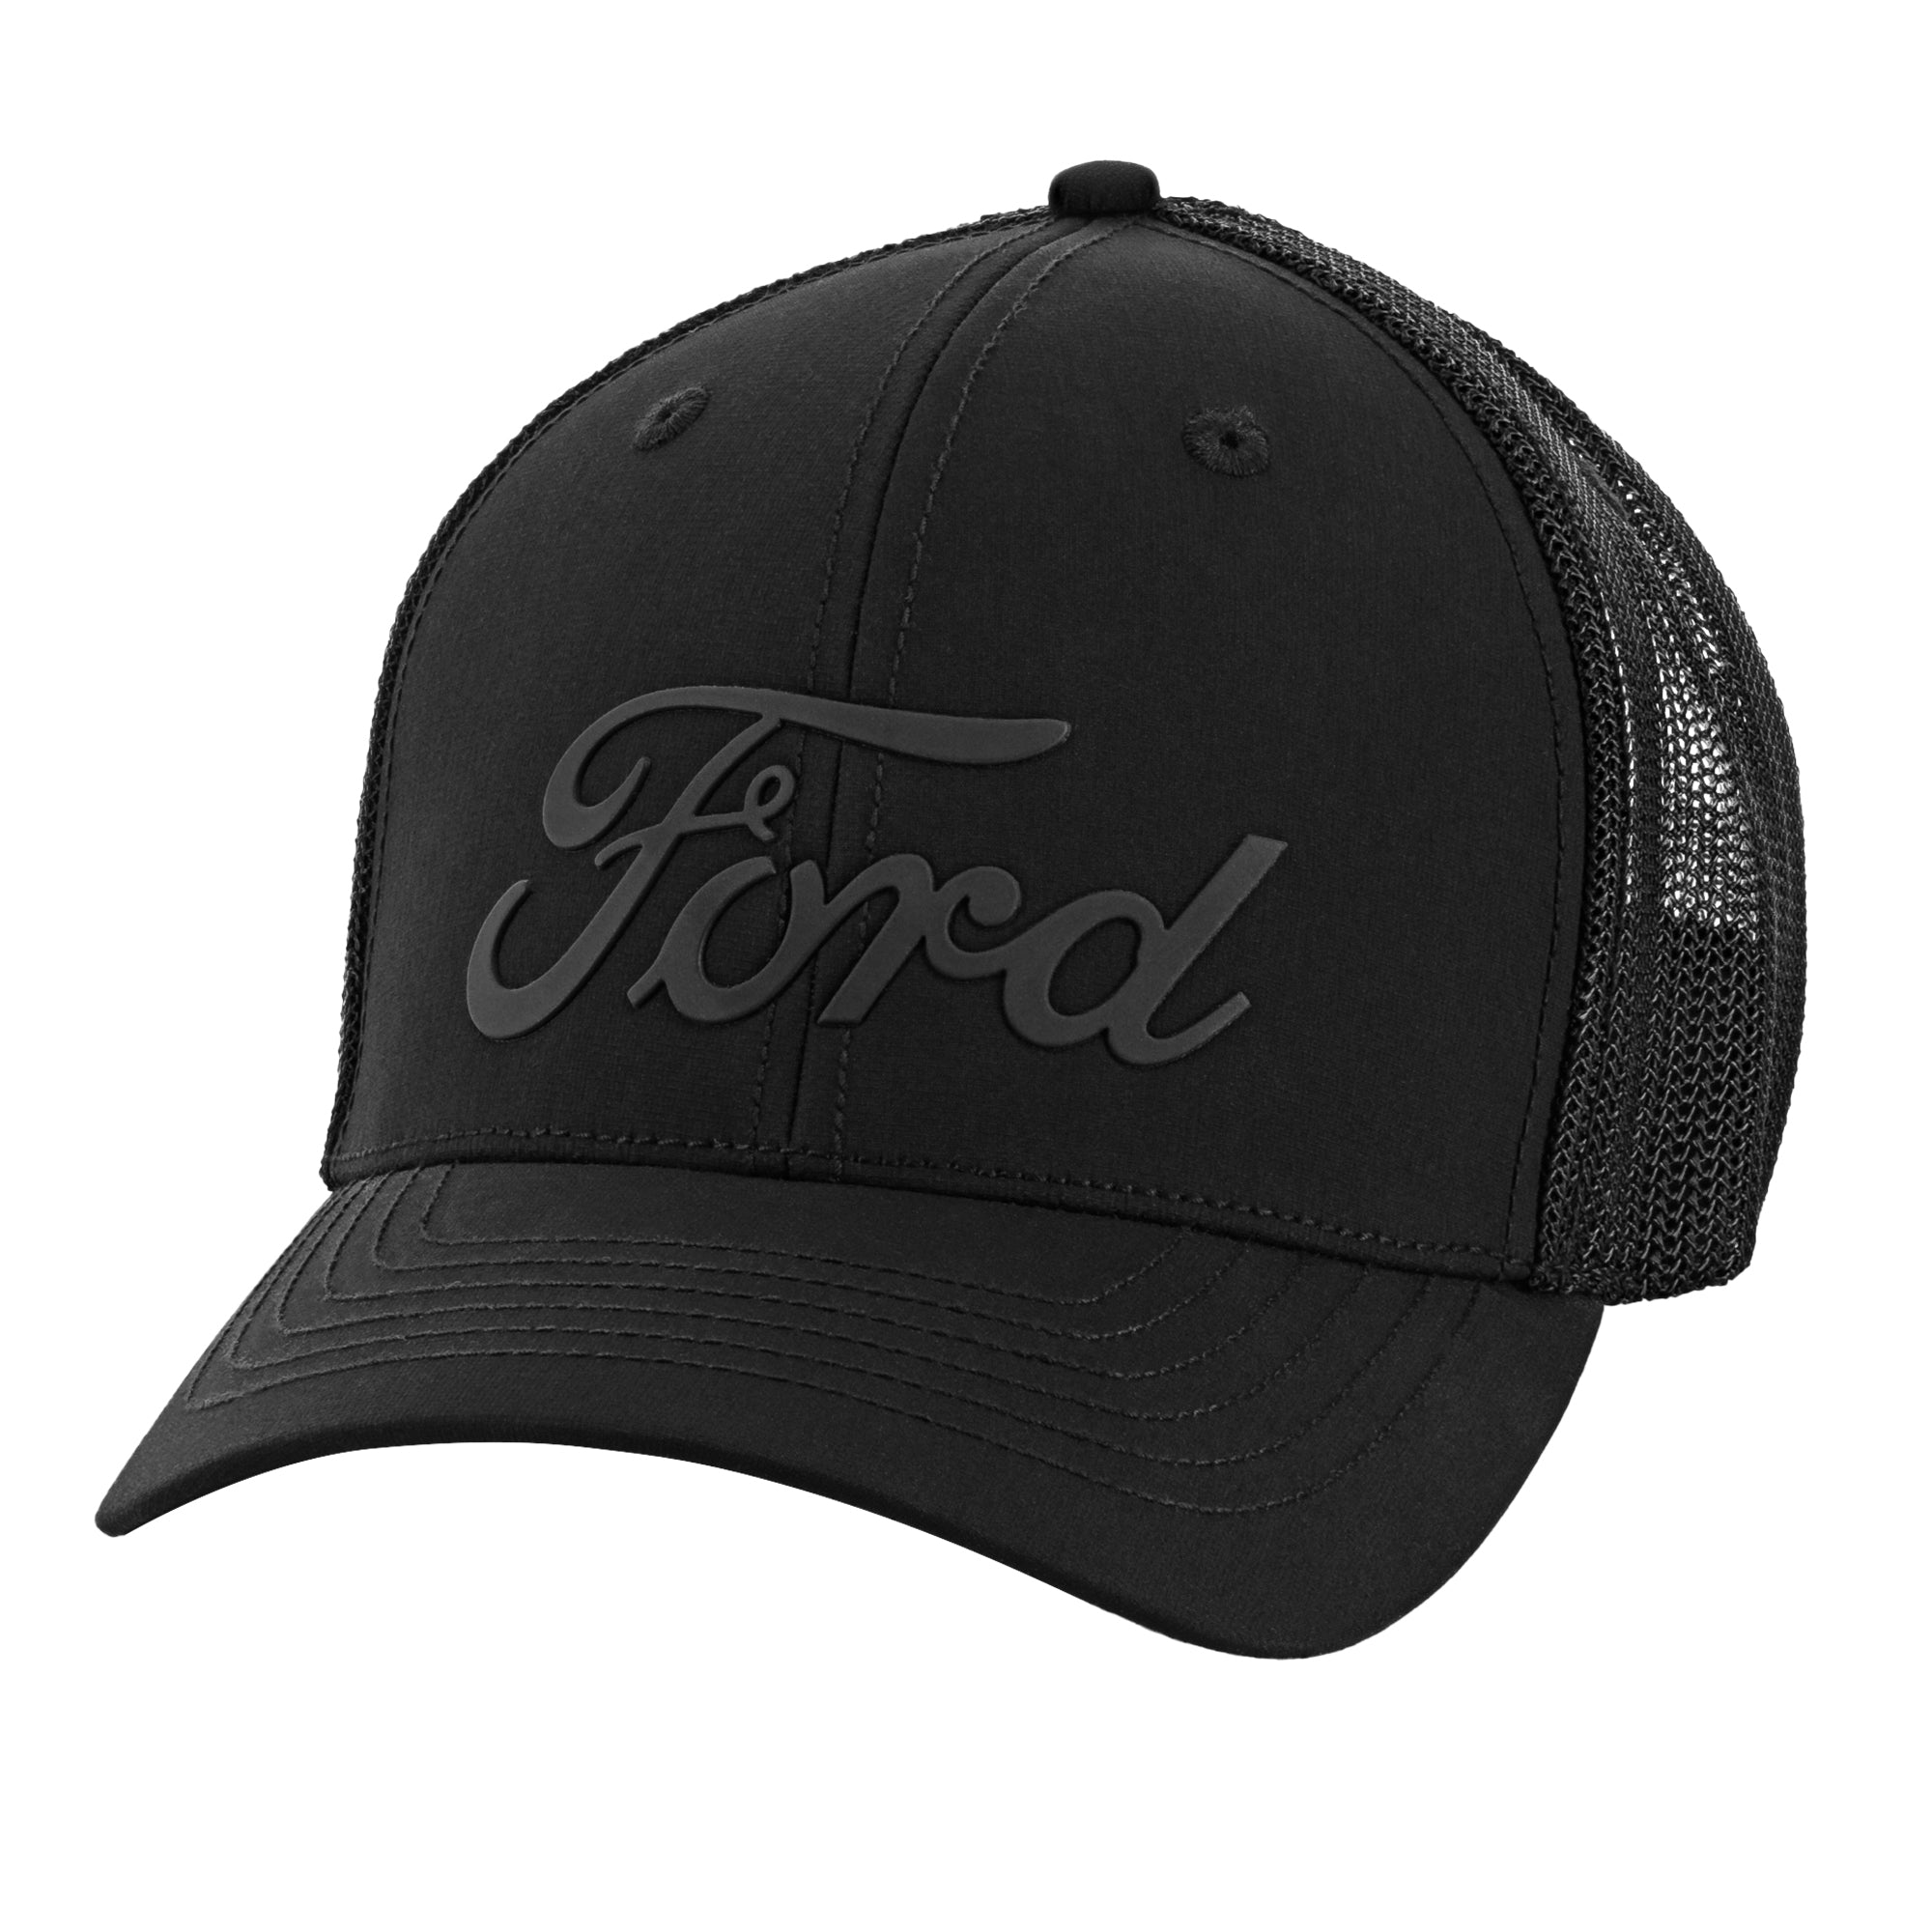 Ford Performance flex fit hat in black 2 different sizes